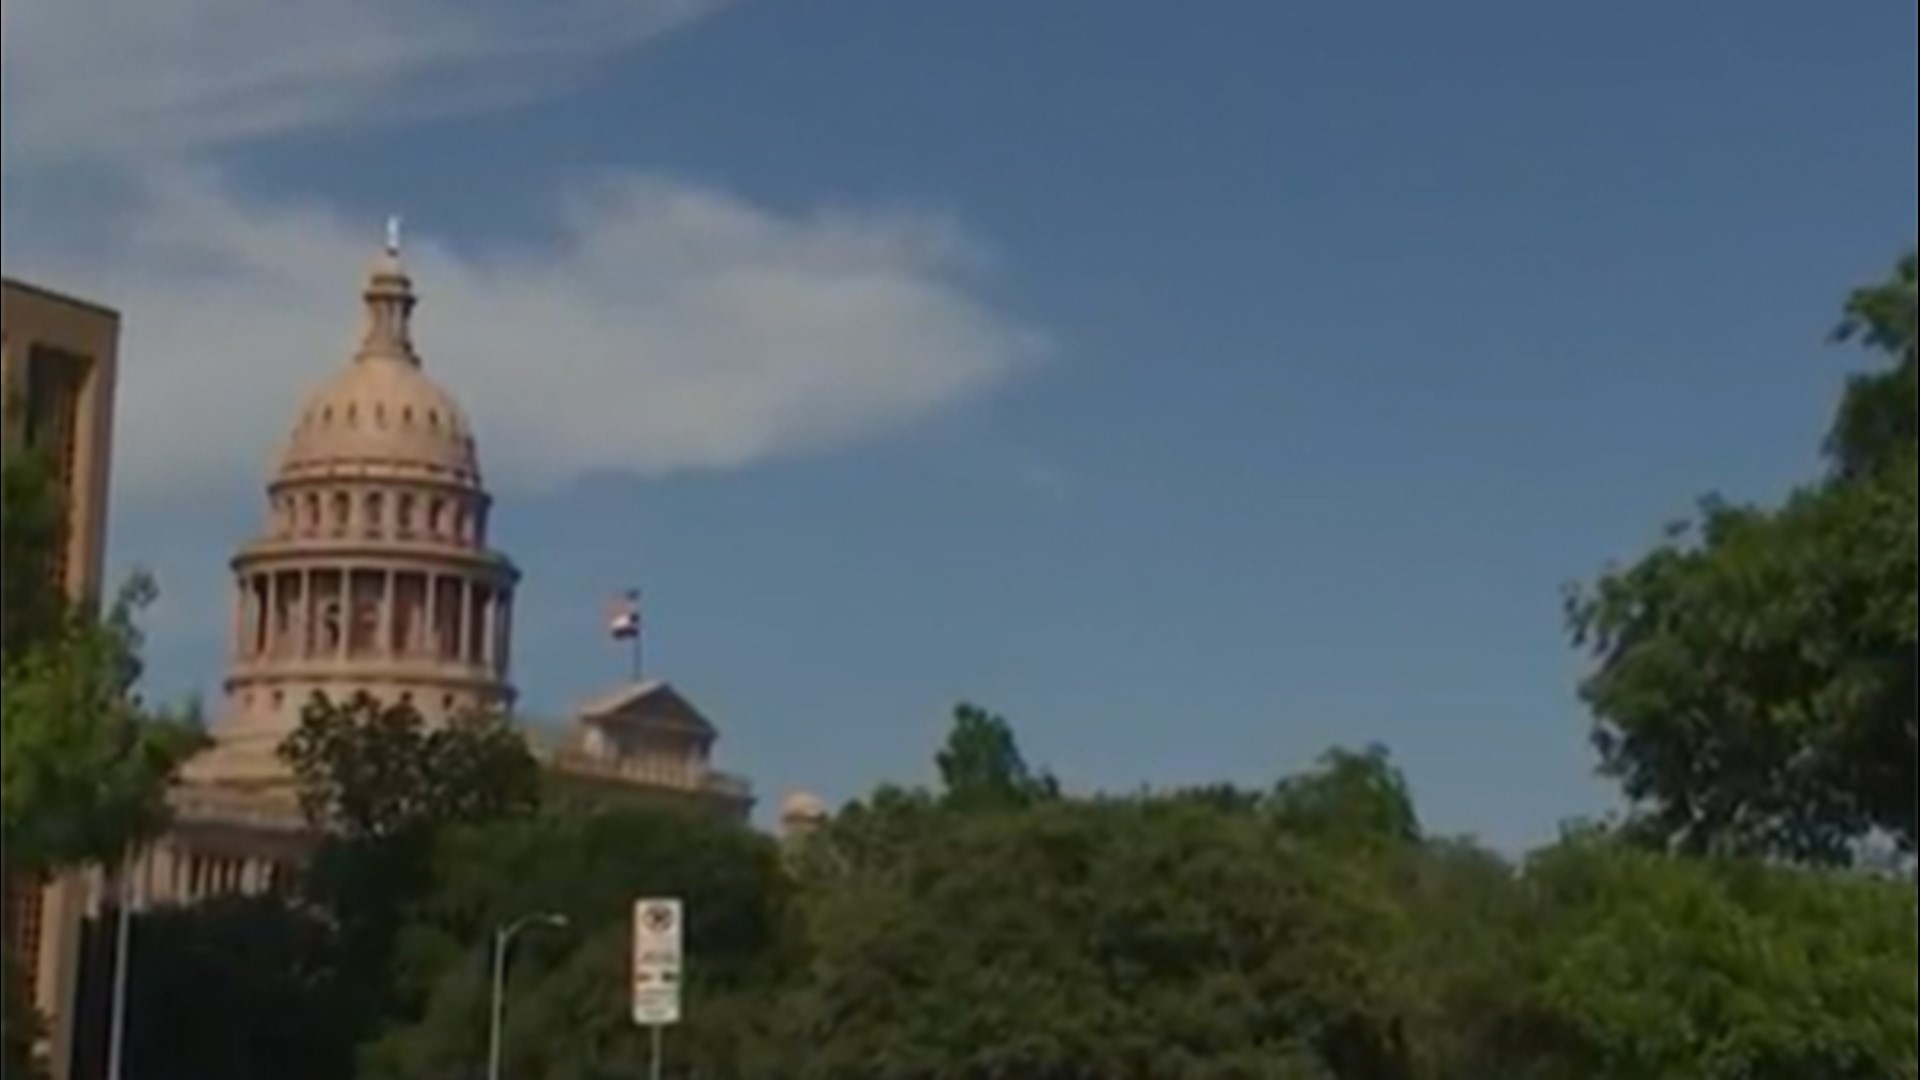 As the session wound down, lawmakers worked to get bills pushed through and sent to Gov. Abbott.